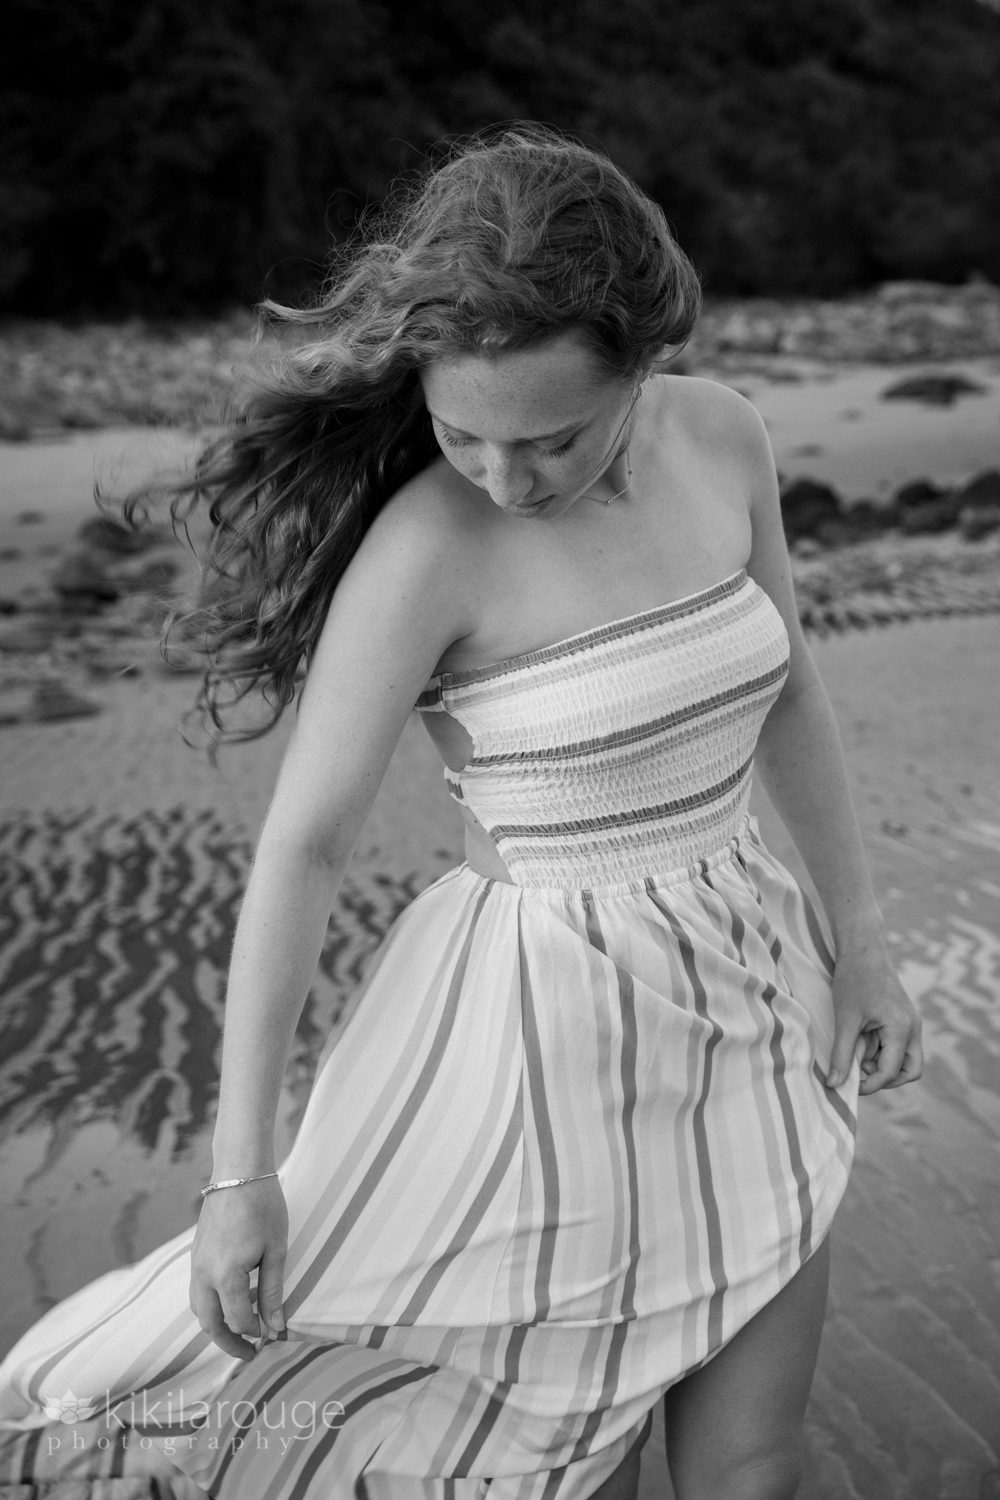 BW of girl with hair blowing at beach looking down holding flowing dress